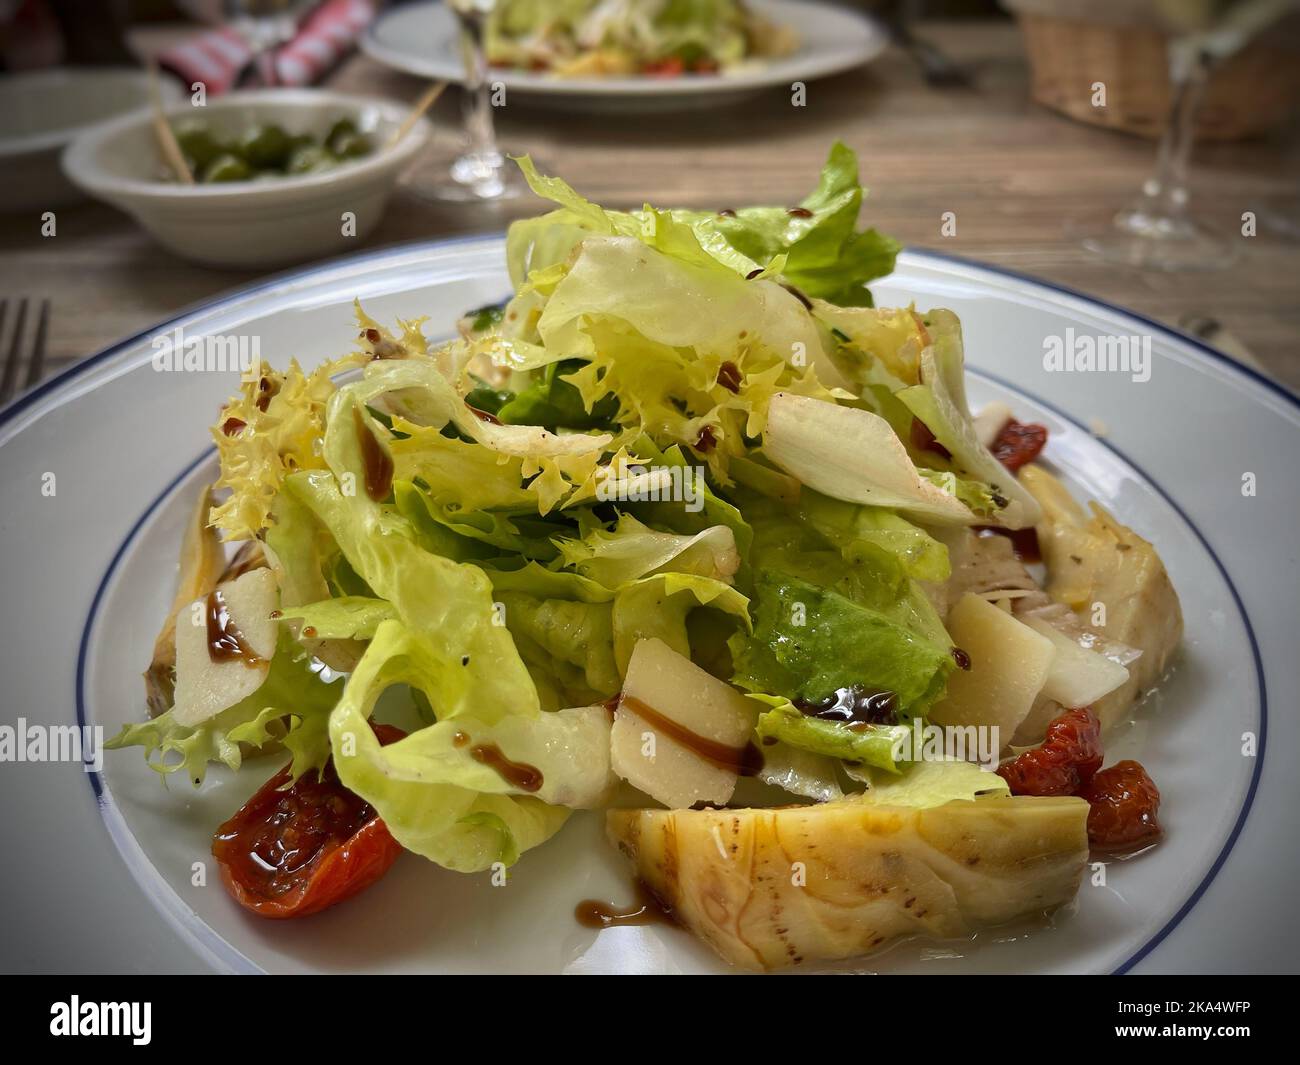 Close-up of a salad with sunblush tomatoes, artichokes and parmesan cheese Stock Photo